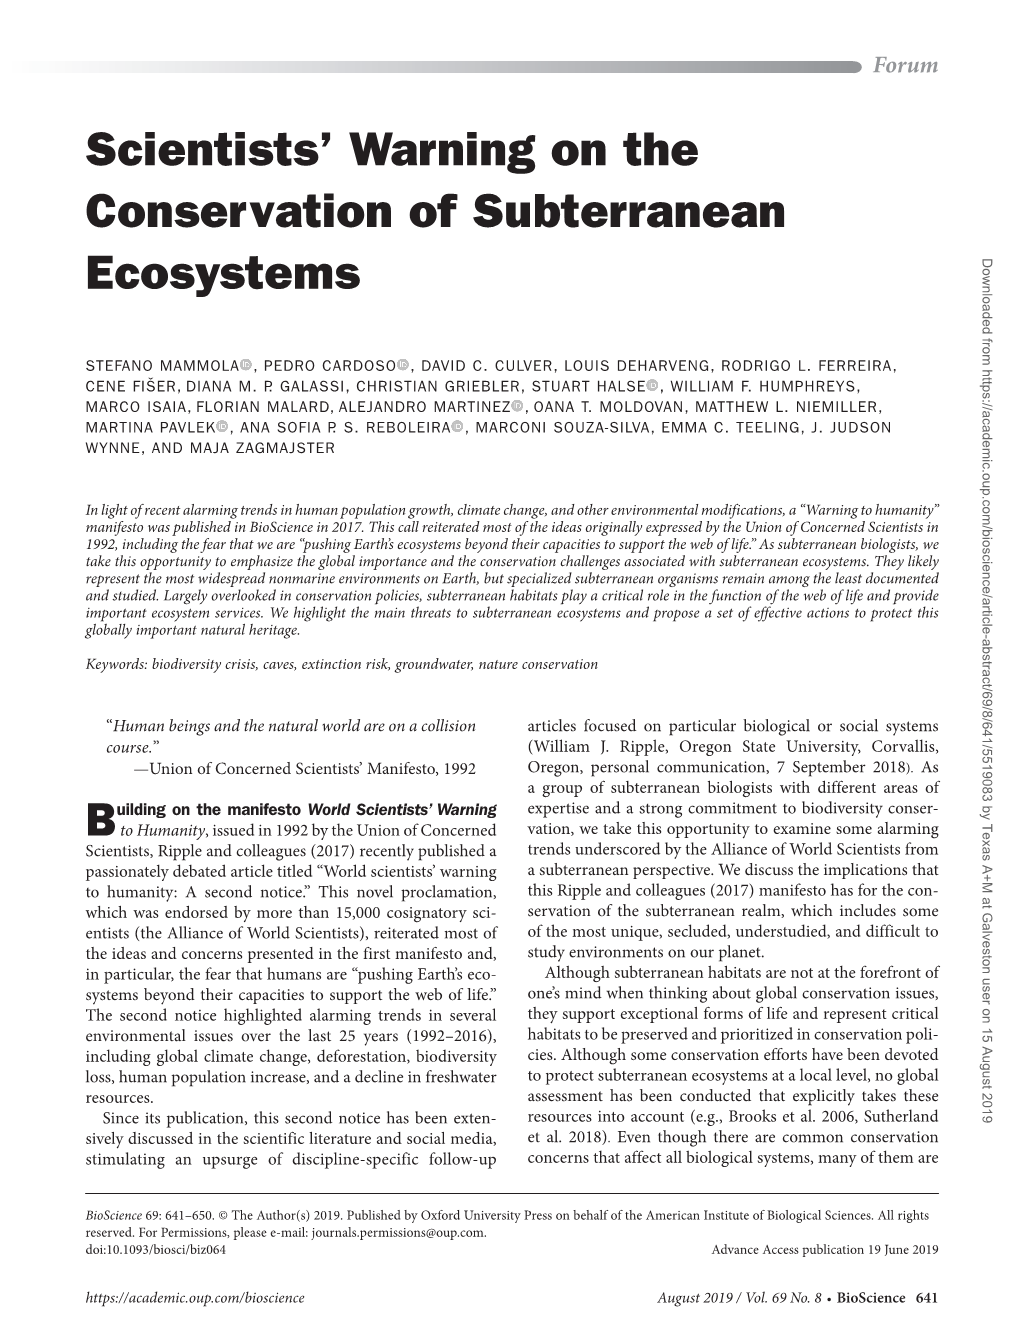 Scientists' Warning on the Conservation of Subterranean